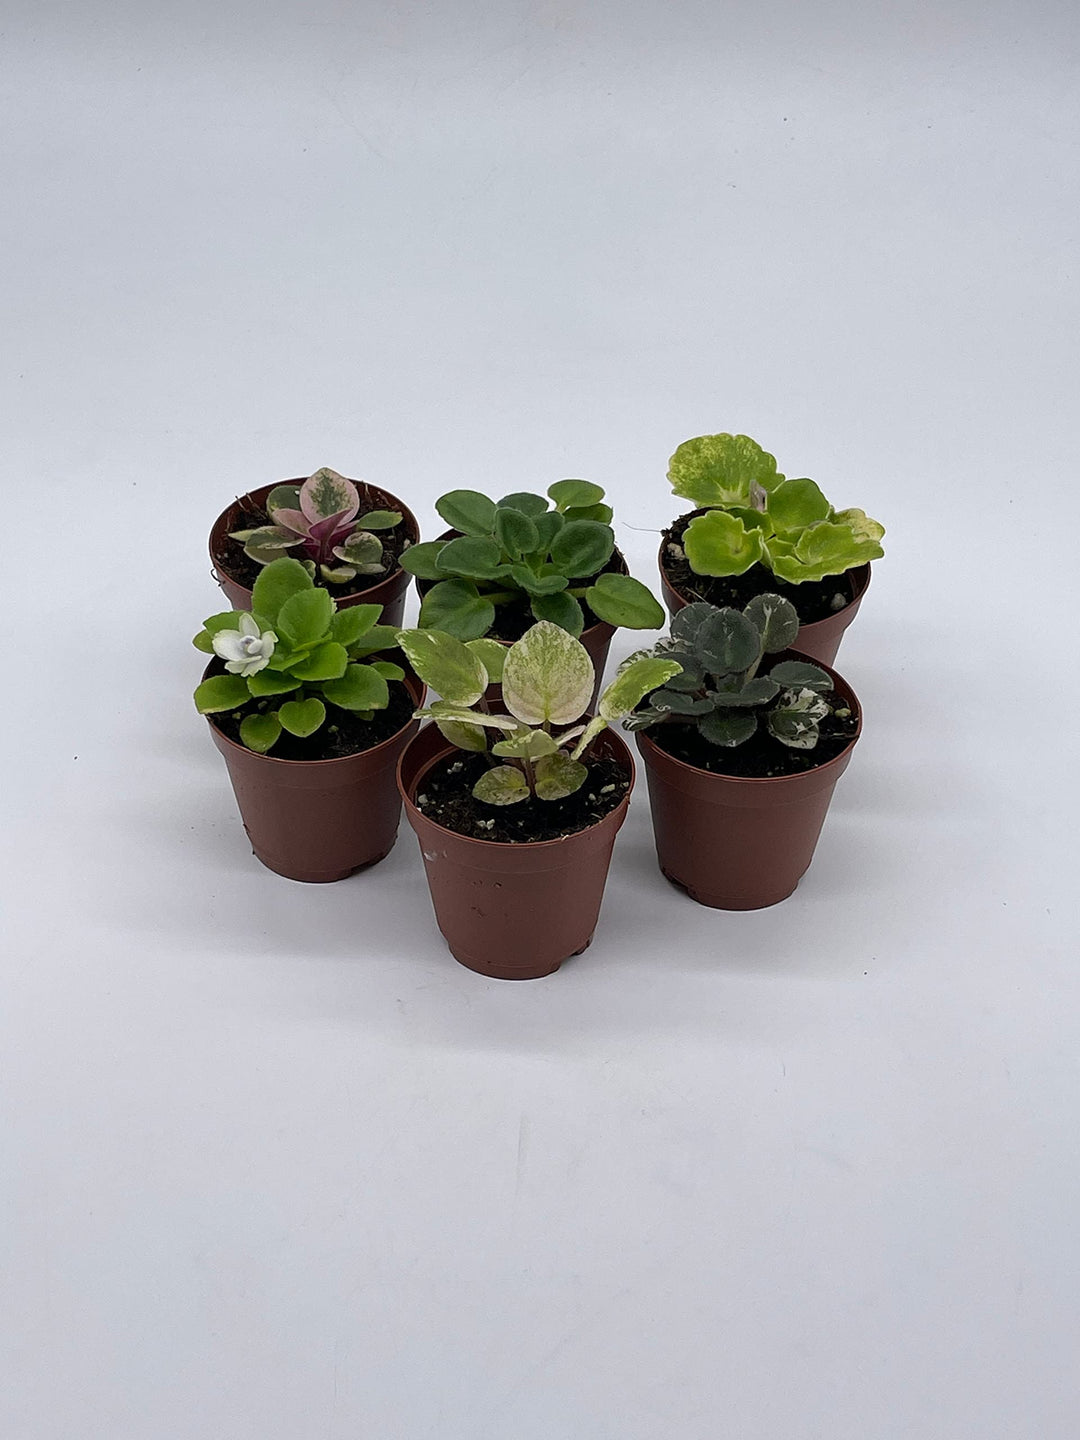 Harmony's African Violet Assortment Set, 2 inch pots, 6 Different African Violets Gesneriad Plants, Tiny Mini Pixie Plant Variety Assorted